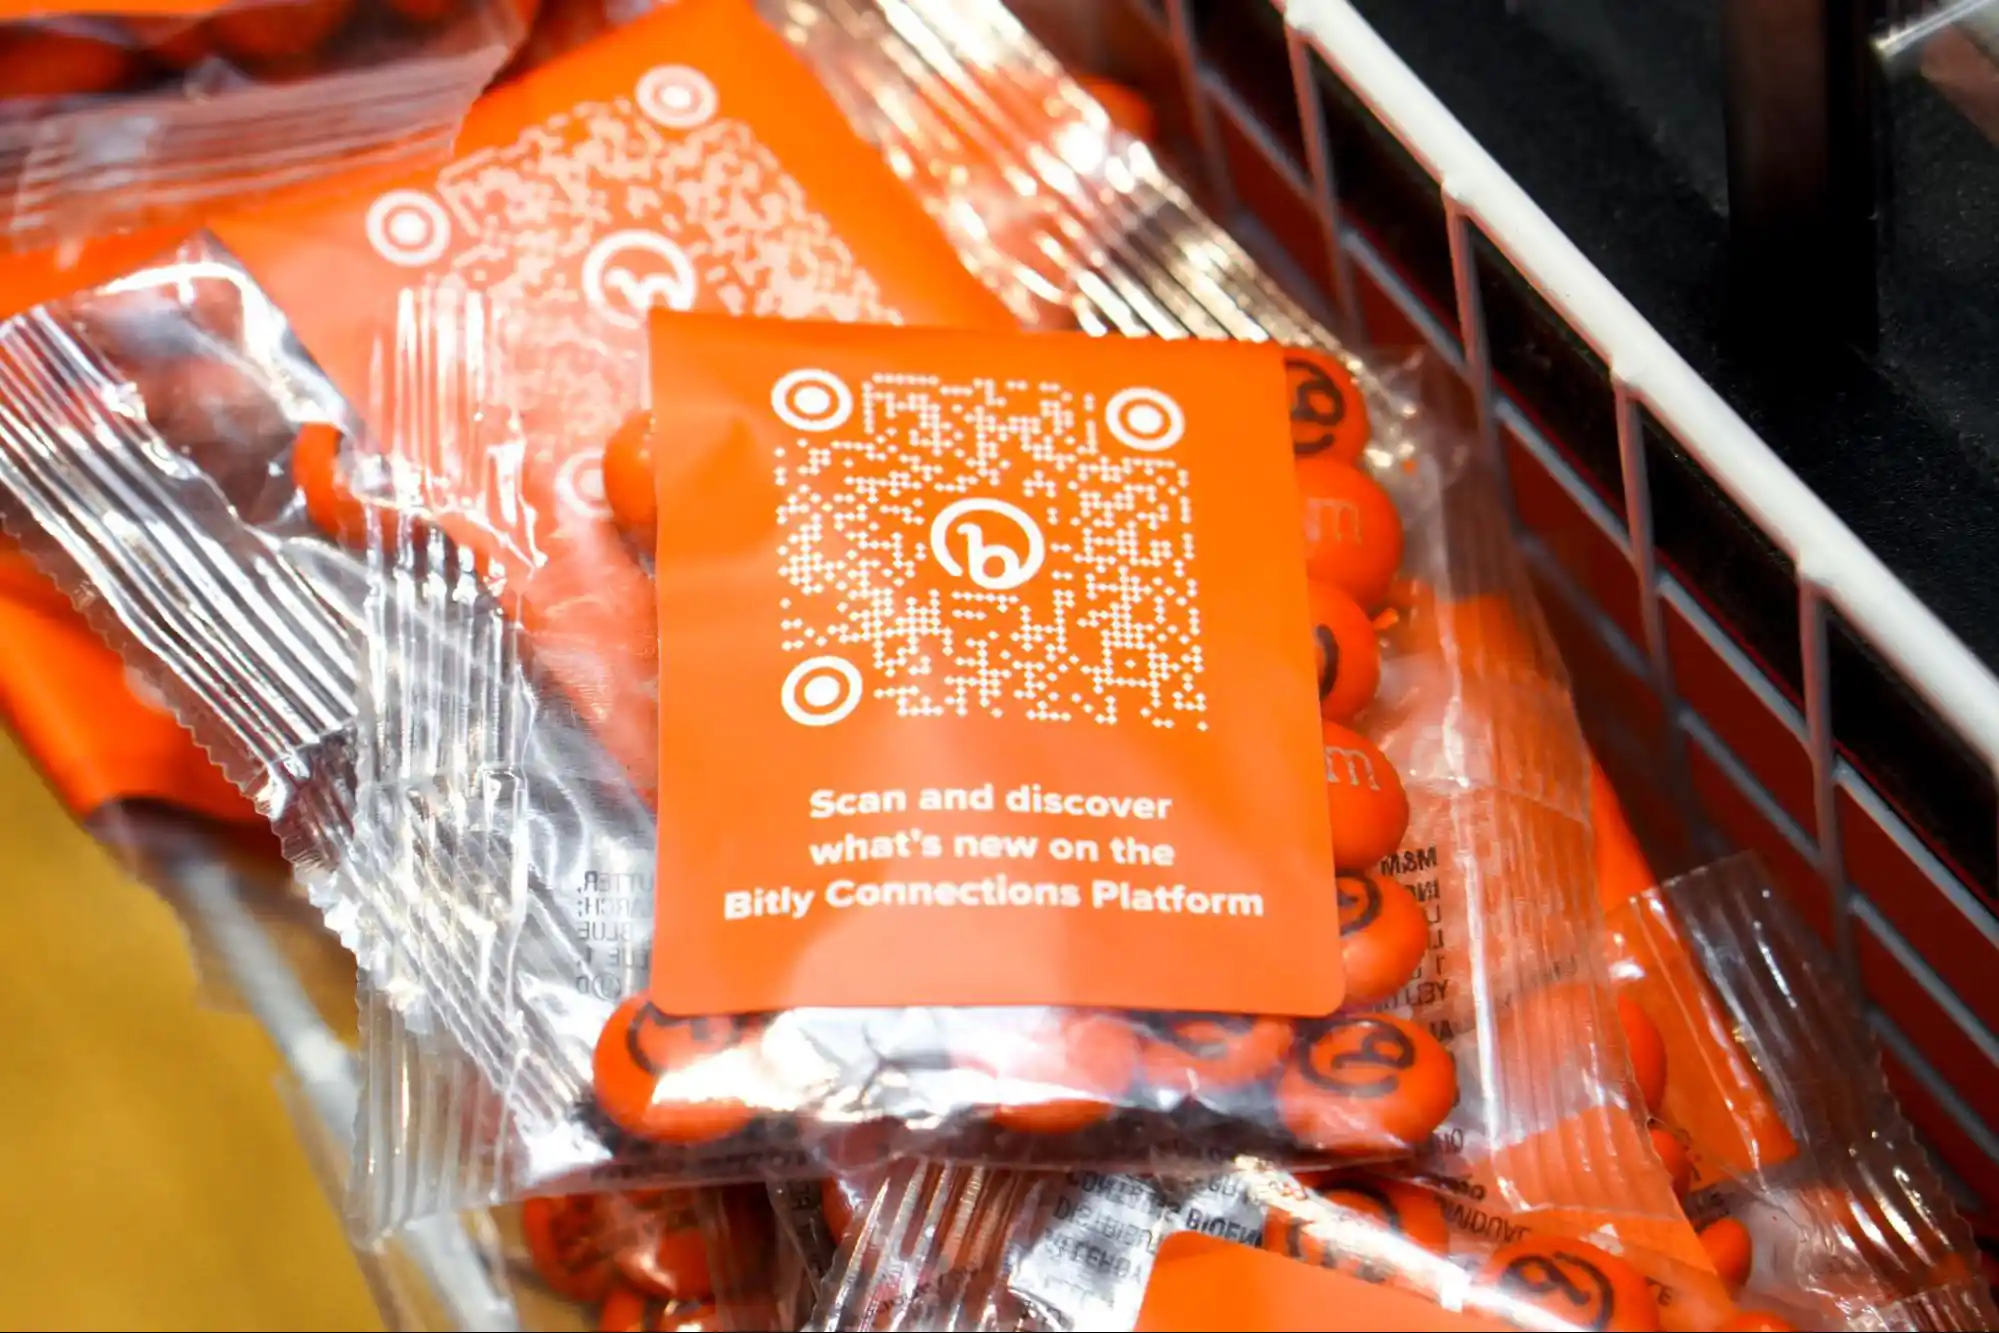 Bag of branded M&Ms at Bitly's booth at Advertising Week 2023 featuring a branded QR Code